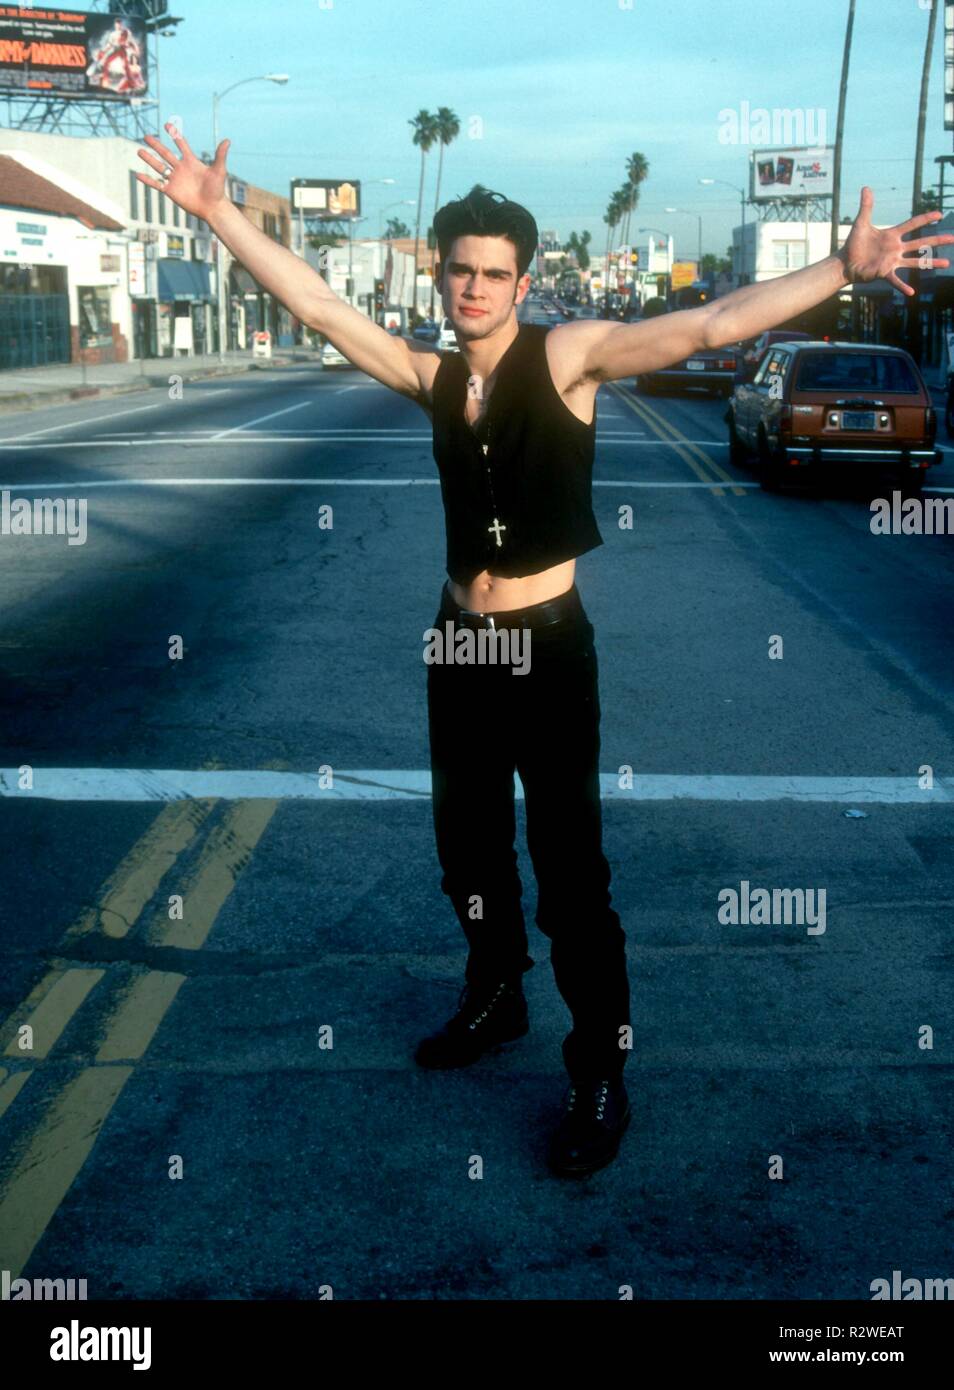 LOS ANGELES, CA - JANUARY 26: (EXCLUSIVE) Actor Damon Pampolina poses at Exclusive Photo shoot on January 26, 1993 in Los Angeles, California. Photo by Barry King/Alamy Stock Photo Stock Photo